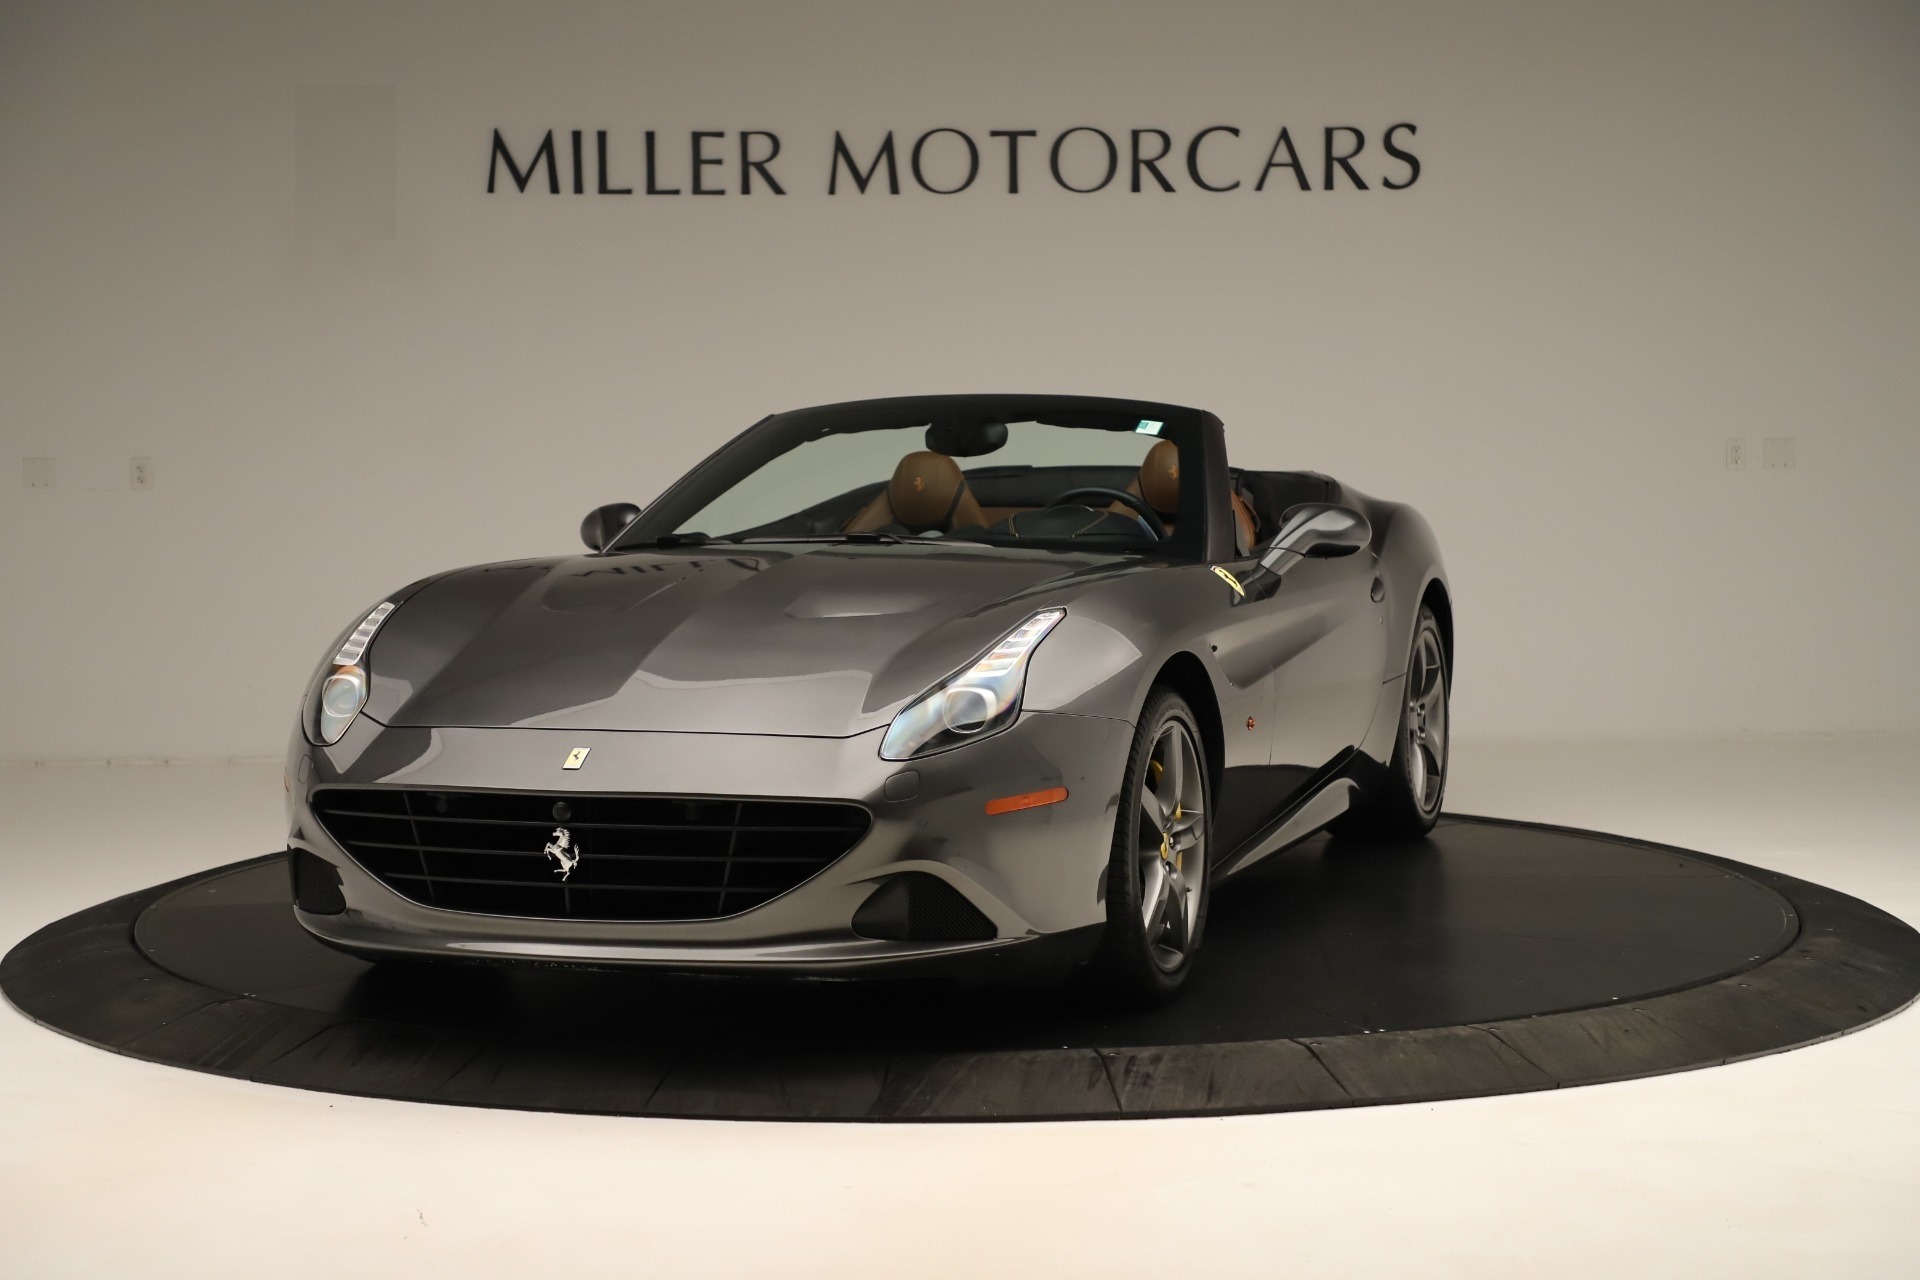 Used 2015 Ferrari California T for sale Sold at Rolls-Royce Motor Cars Greenwich in Greenwich CT 06830 1